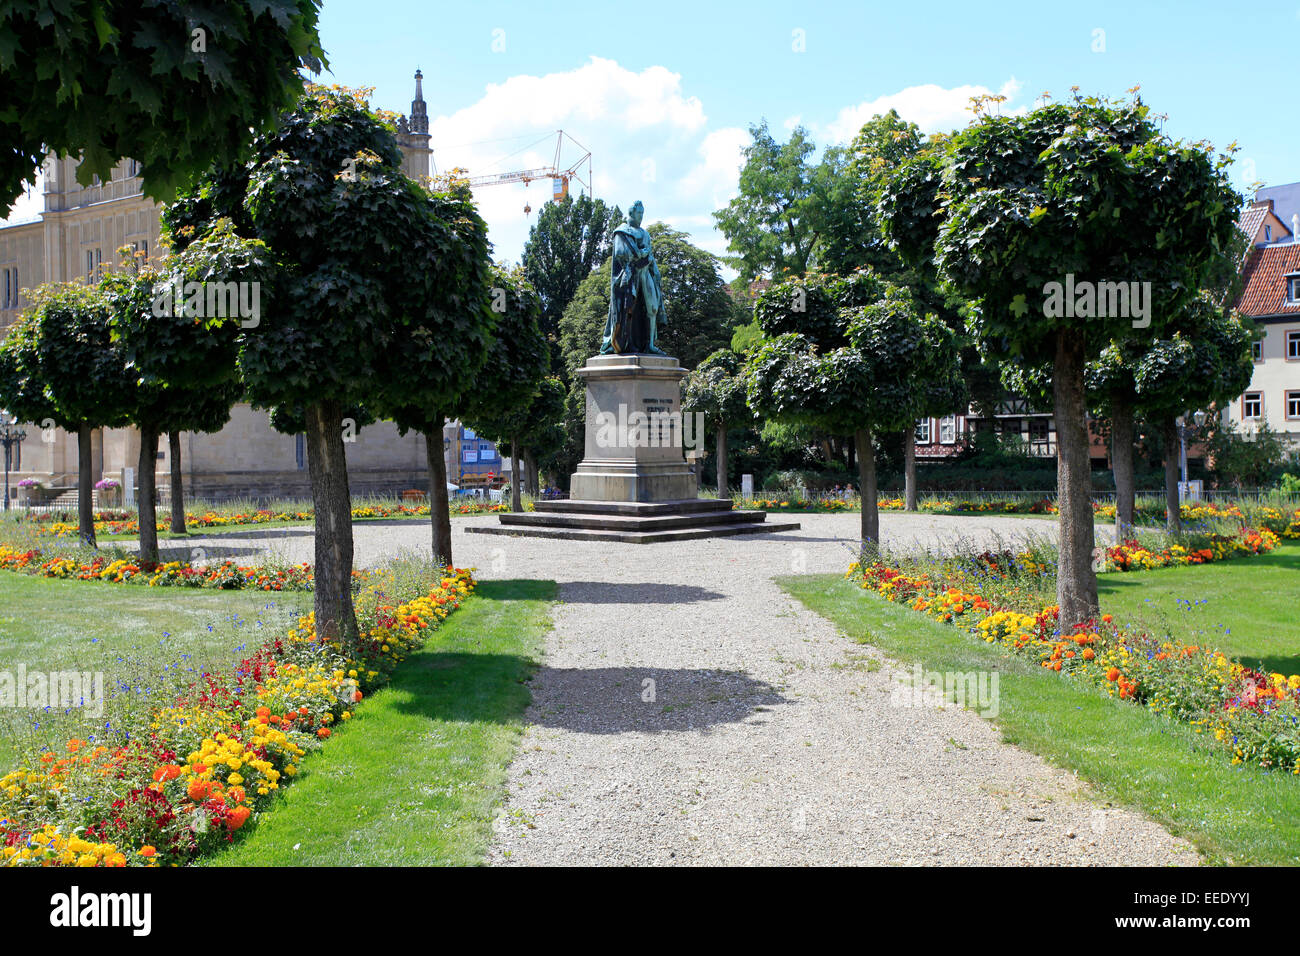 The Palace Square and Ehrenburg Castle in Coburg. It was built from 1825 by Duke Ernst I. In front the monument of Duke Ernst I. Photo: Klaus Nowotnick Date: August 12, 2012 Stock Photo